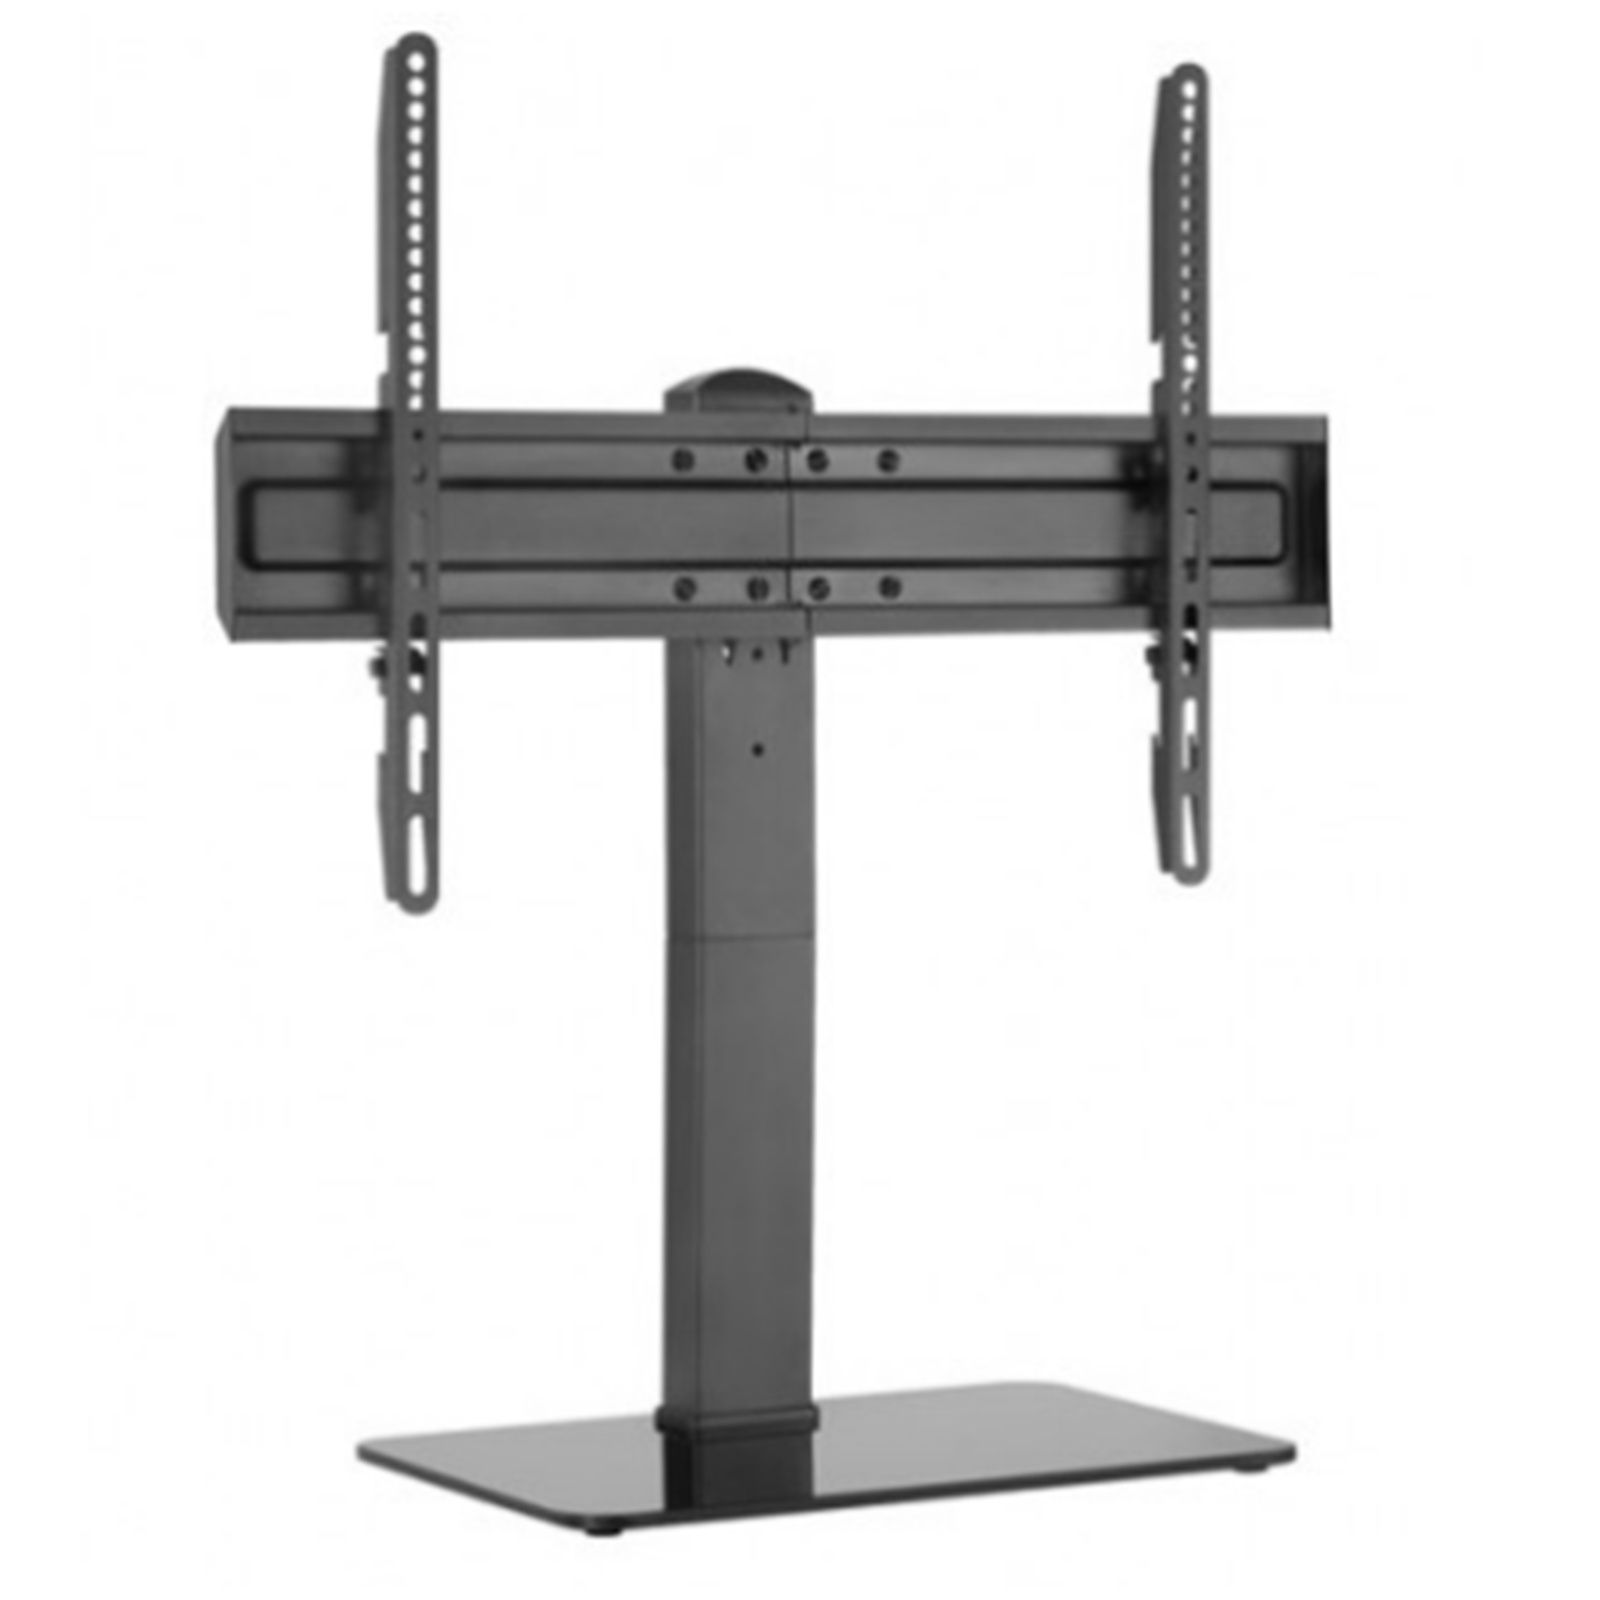 Buy The Omp M7446 Universal Tabletop Tv Stand Large 37 70 Vesa 400 ( M7446  ) Online – Pbtech.co.nz With Universal Tabletop Tv Stands (Gallery 2 of 20)